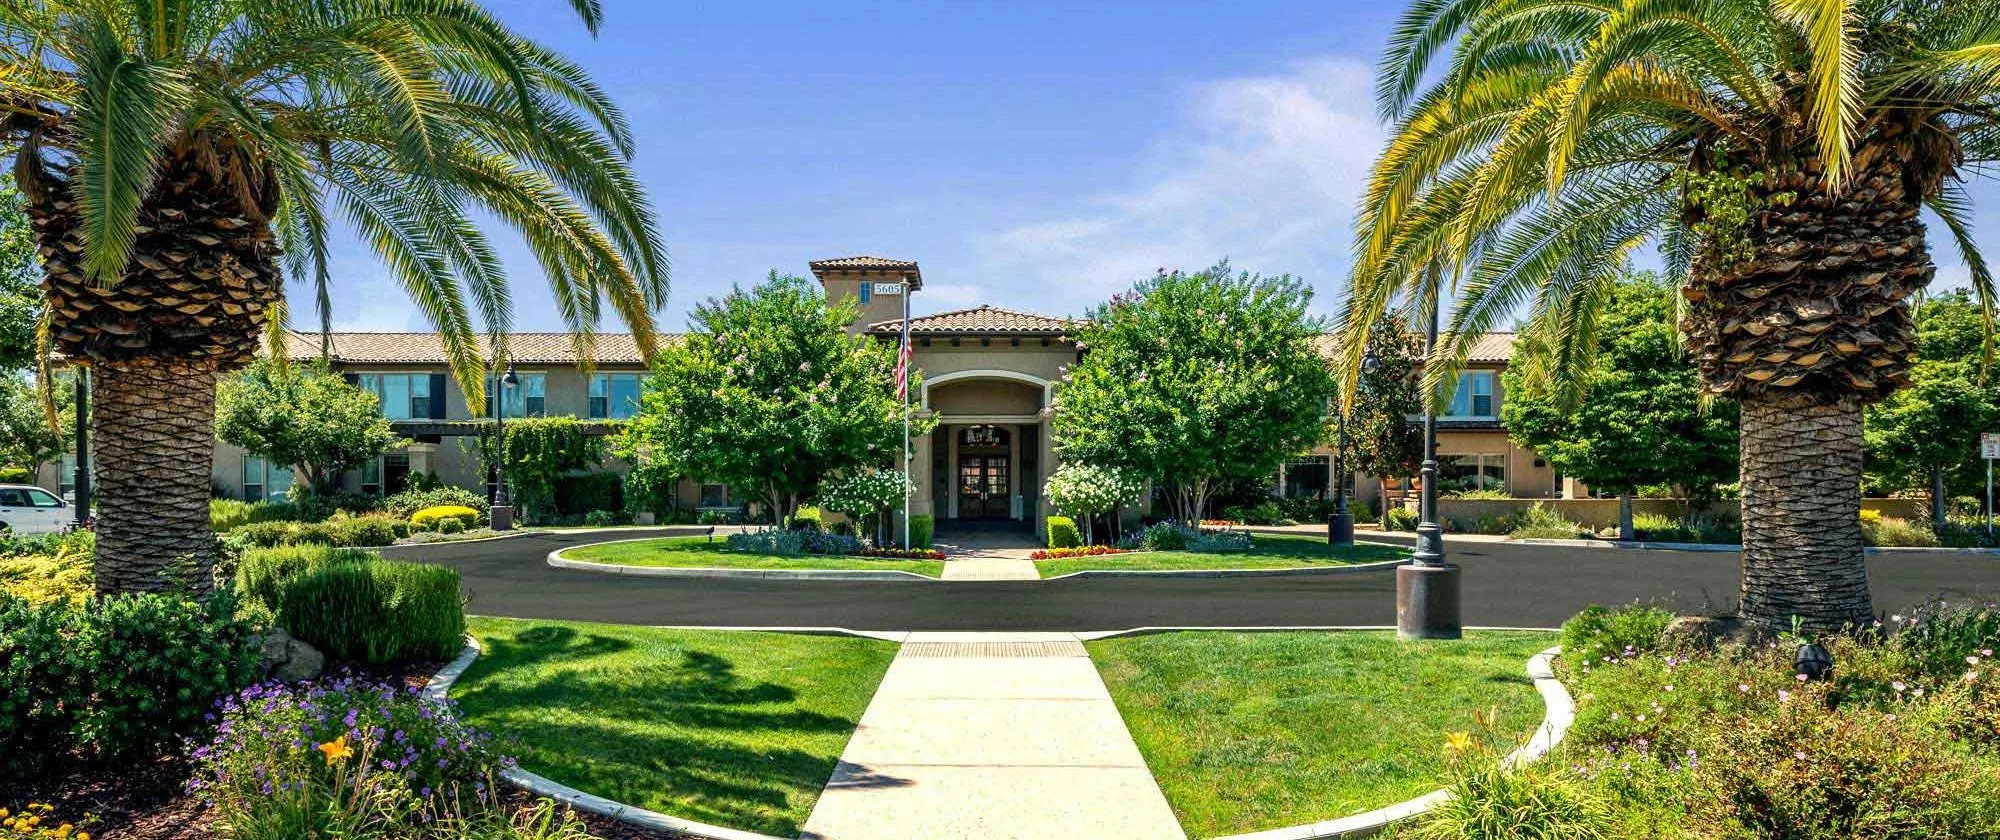 Fresno entrance with beautiful gardens and palm trees